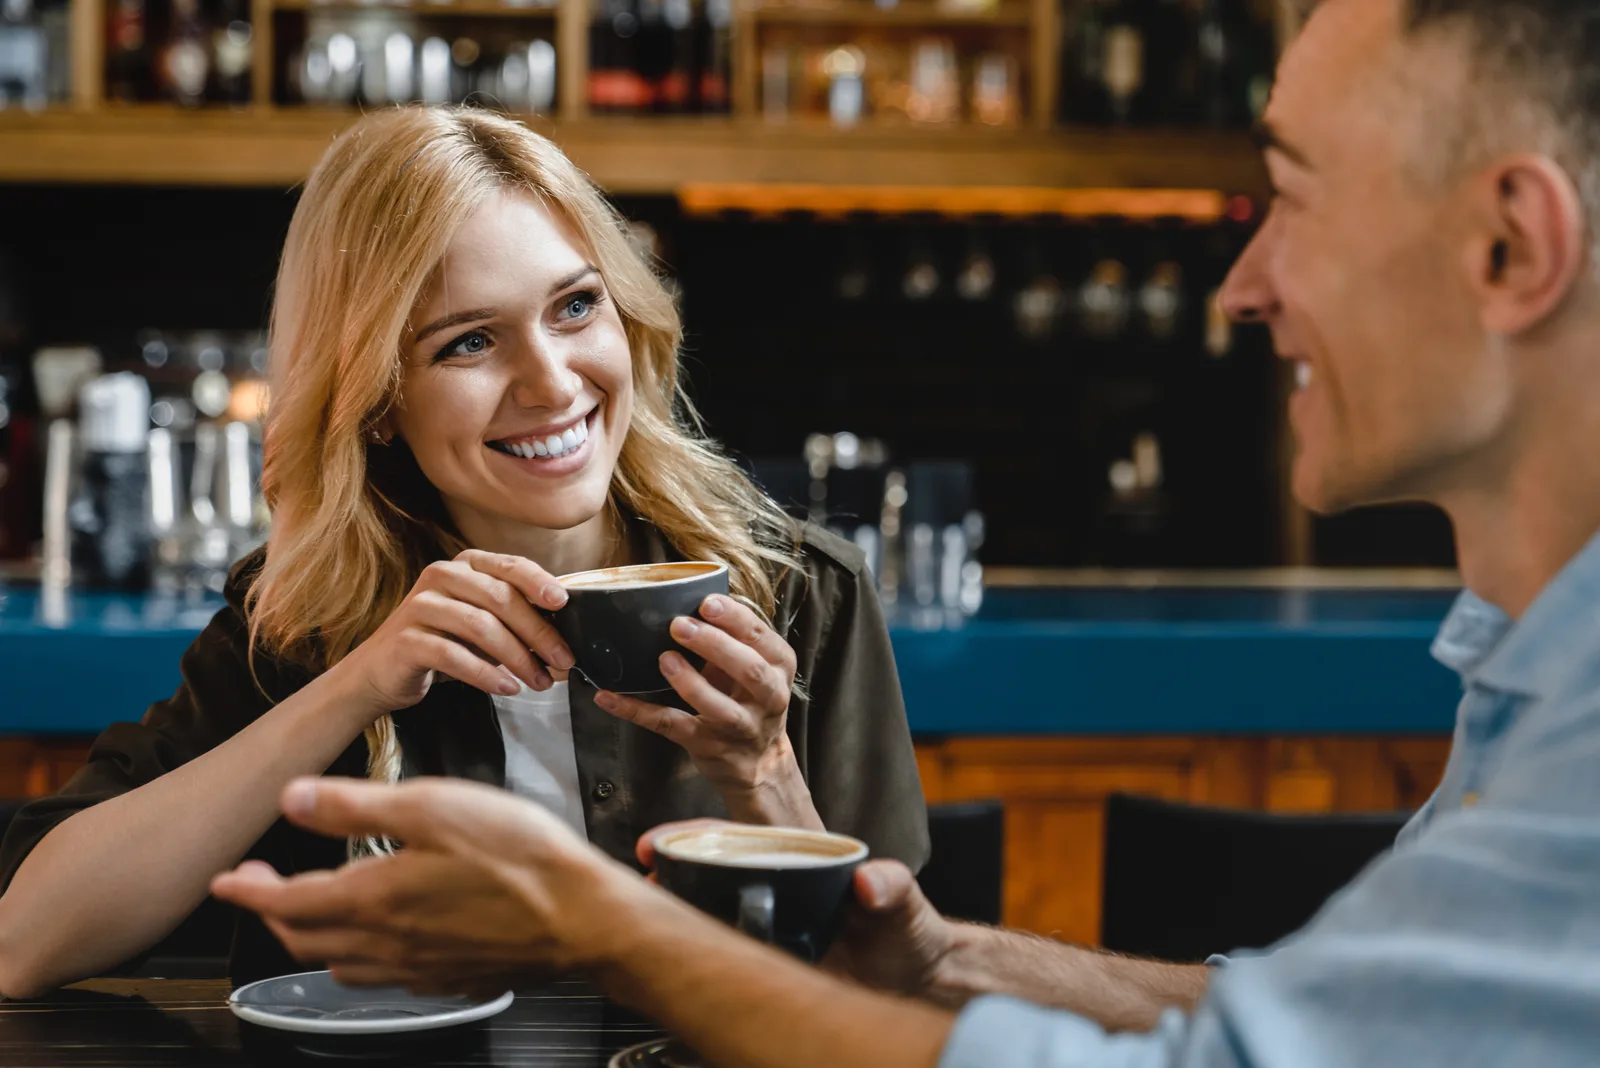 a smiling woman with long blonde hair is talking to a man while drinking coffee